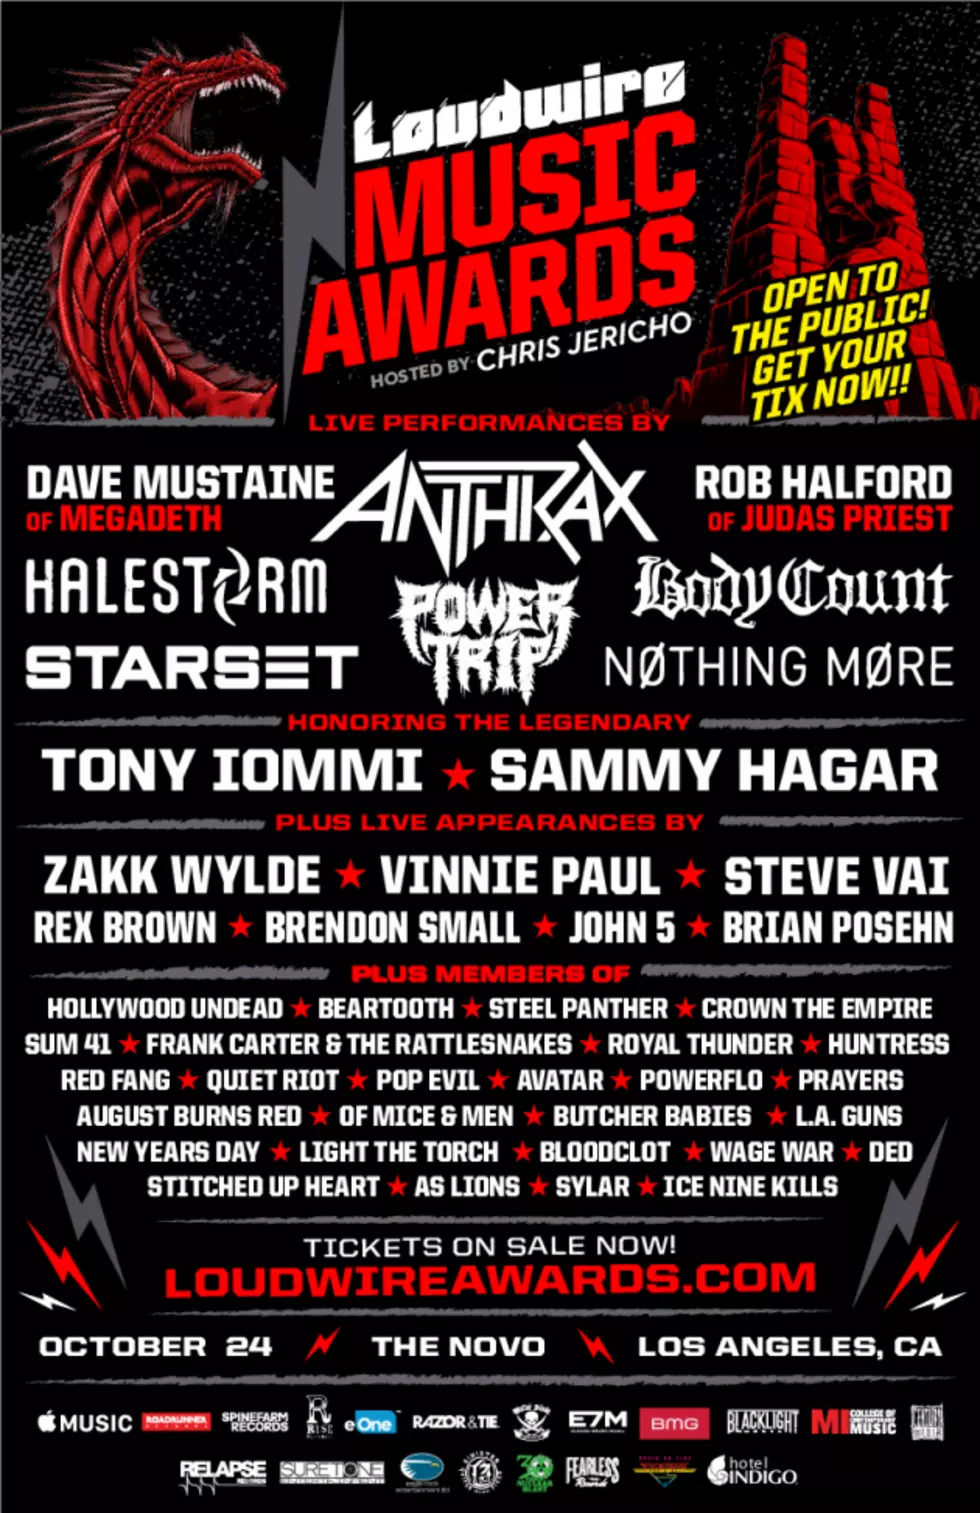 EXPERIENCE THE LOUDWIRE MUSIC AWARDS TONIGHT IN LOS ANGELES!